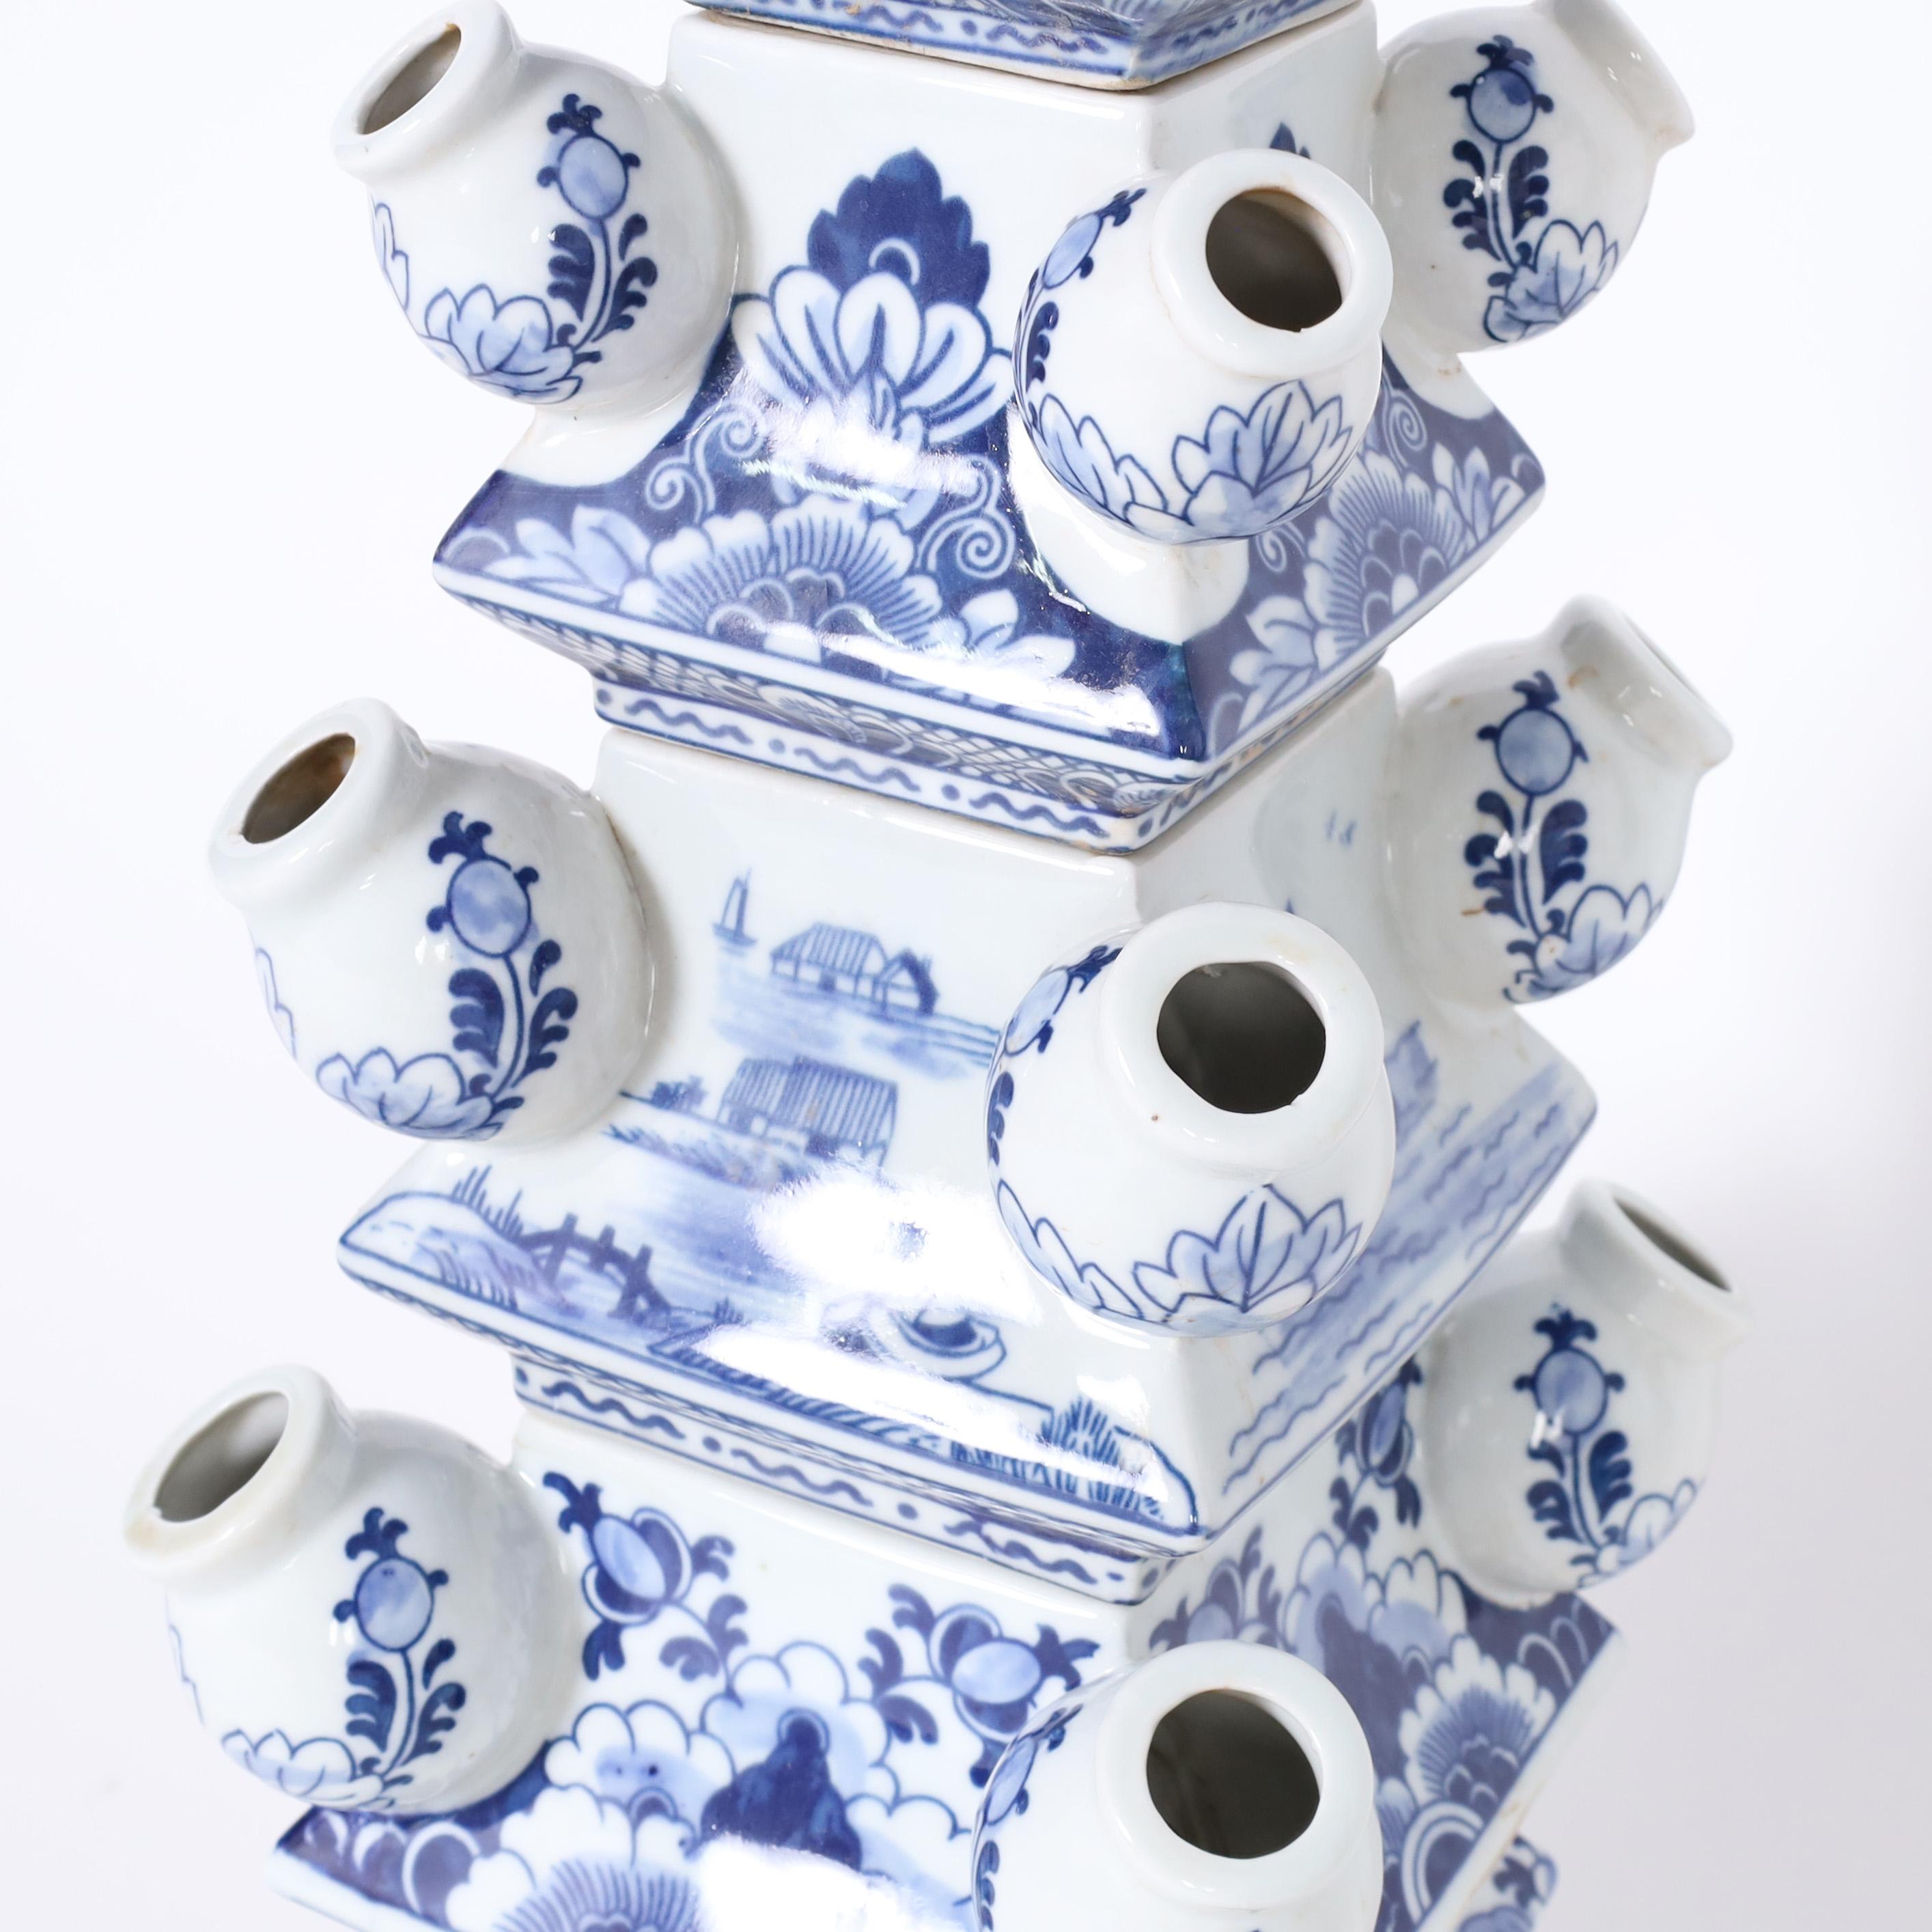 Pair of Chinese Blue and White Porcelain Tulipiere Towers In Good Condition For Sale In Palm Beach, FL